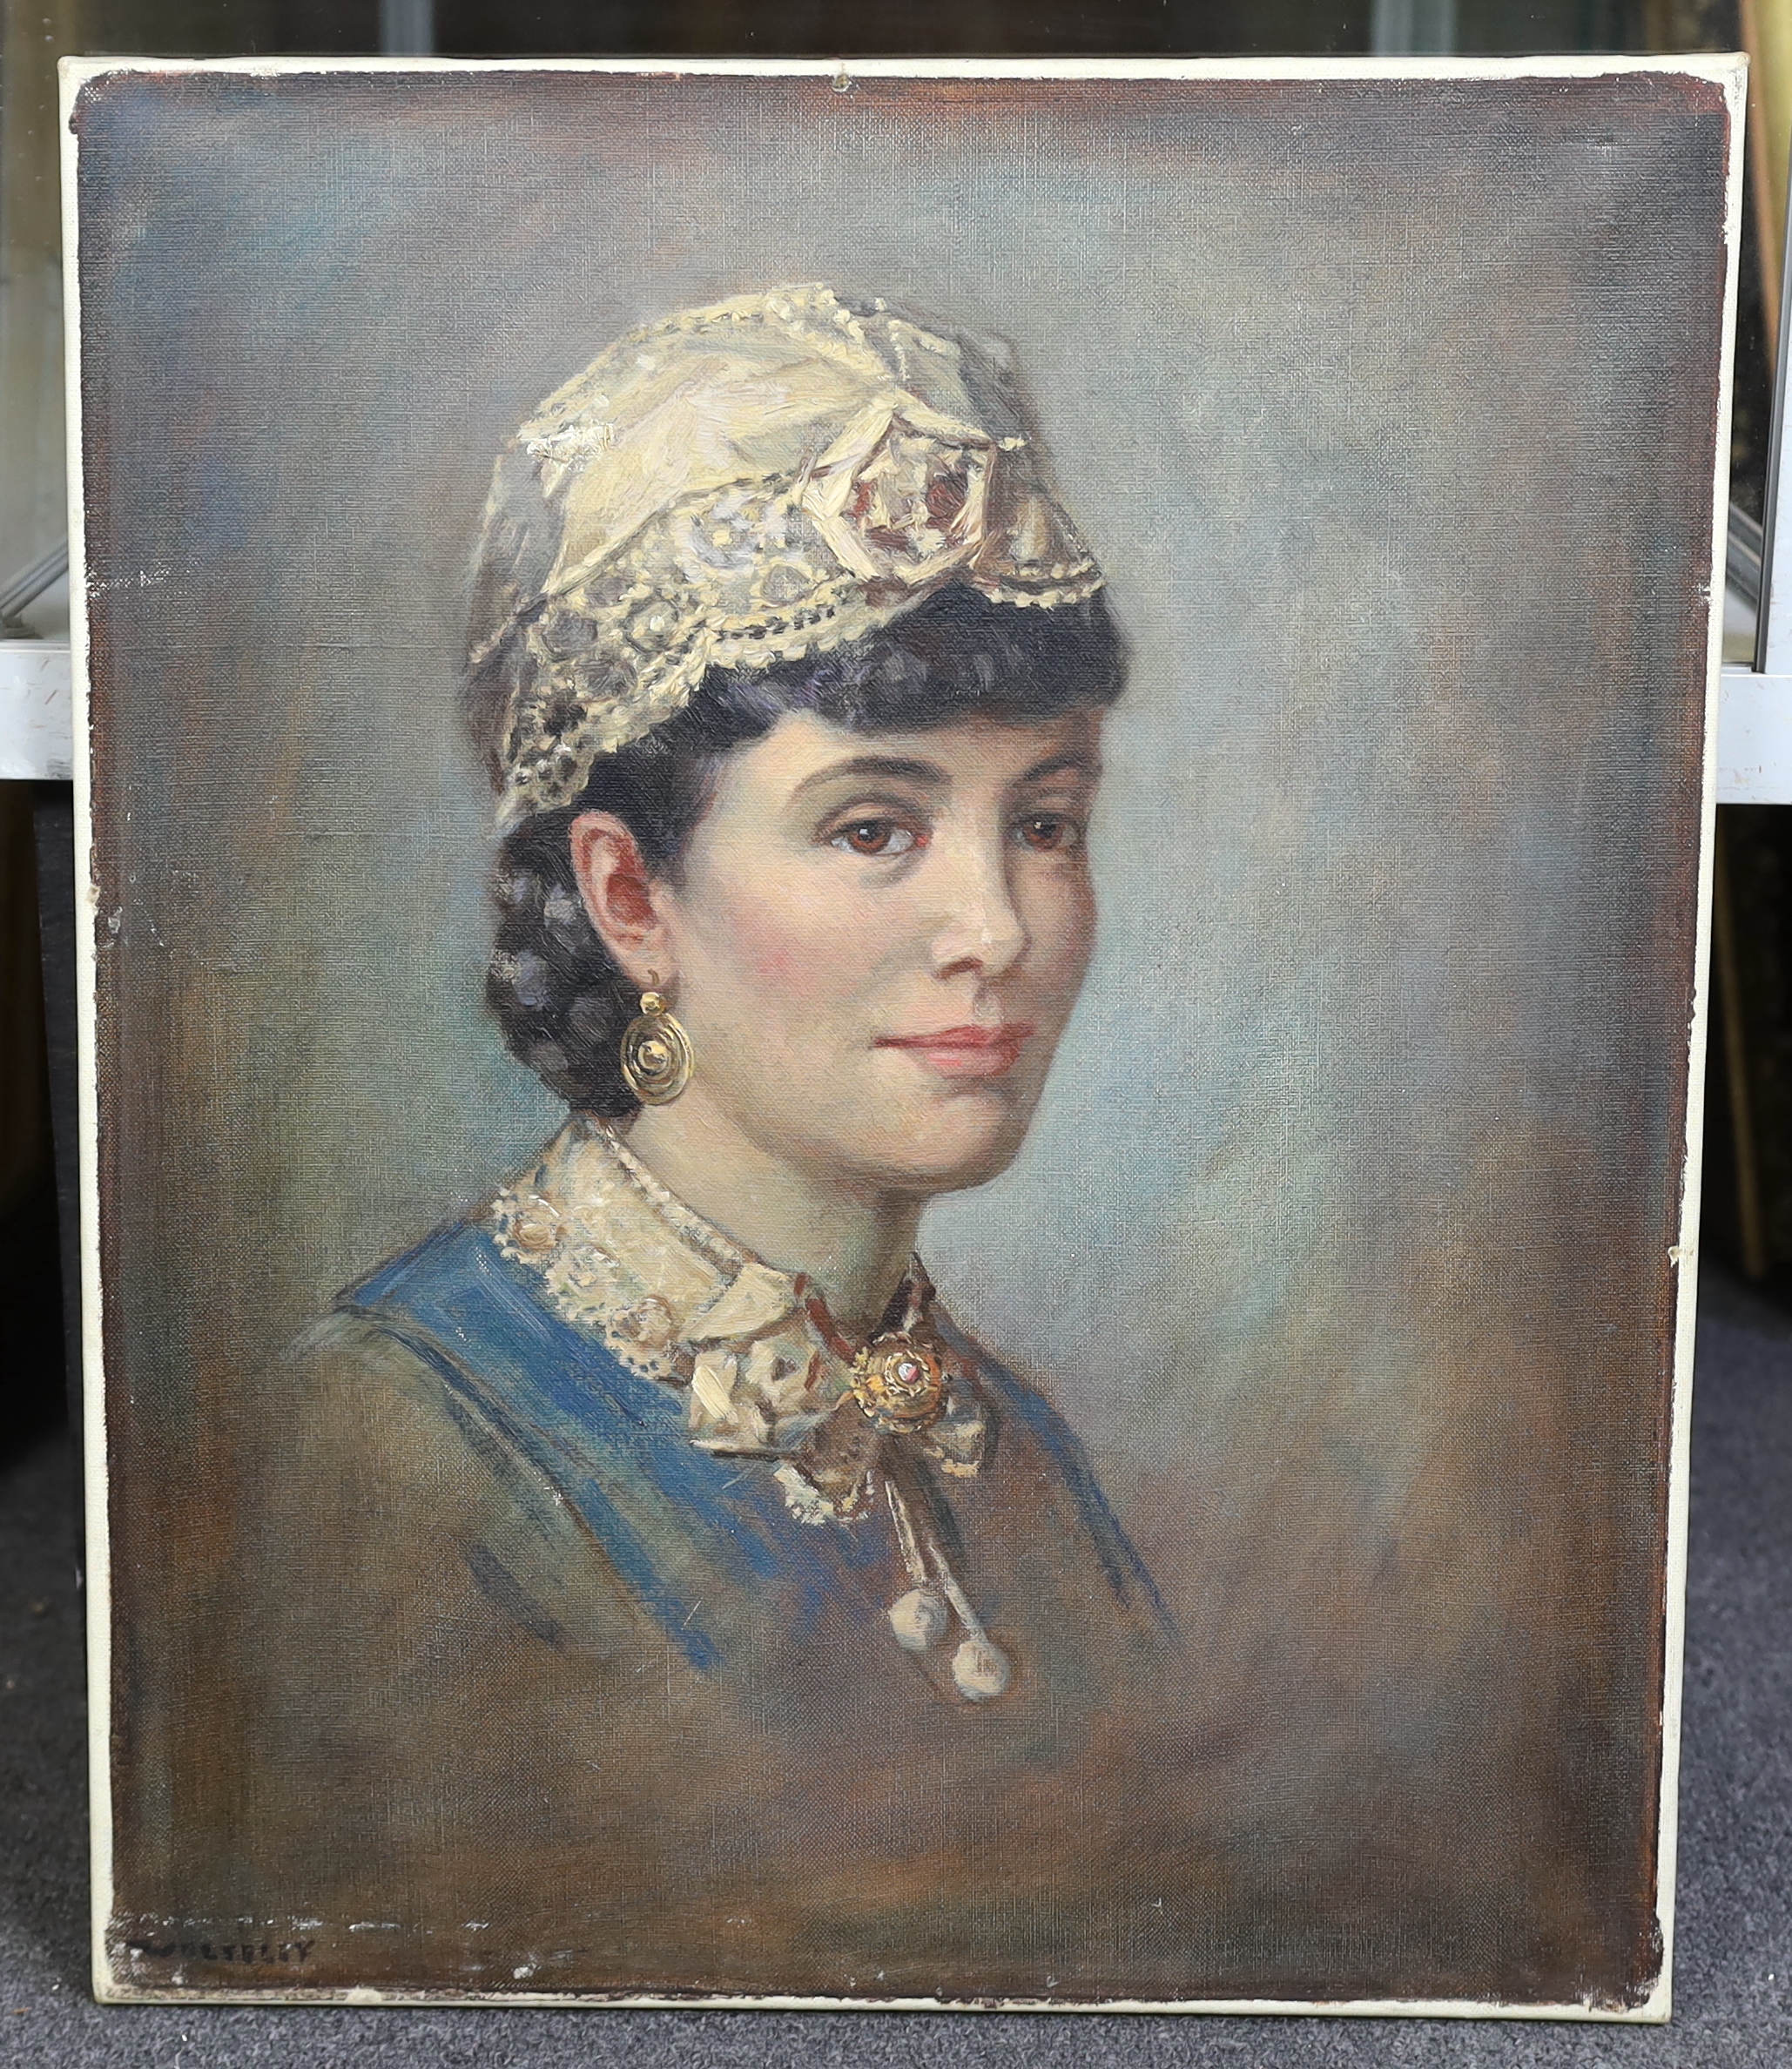 Garnet Ruskin Wolseley (English, 1884-1967), oil on canvas, Portrait of a lady wearing a lace cap, signed, 59 x 48cm. Condition - fair, other than damage to canvas to the cap